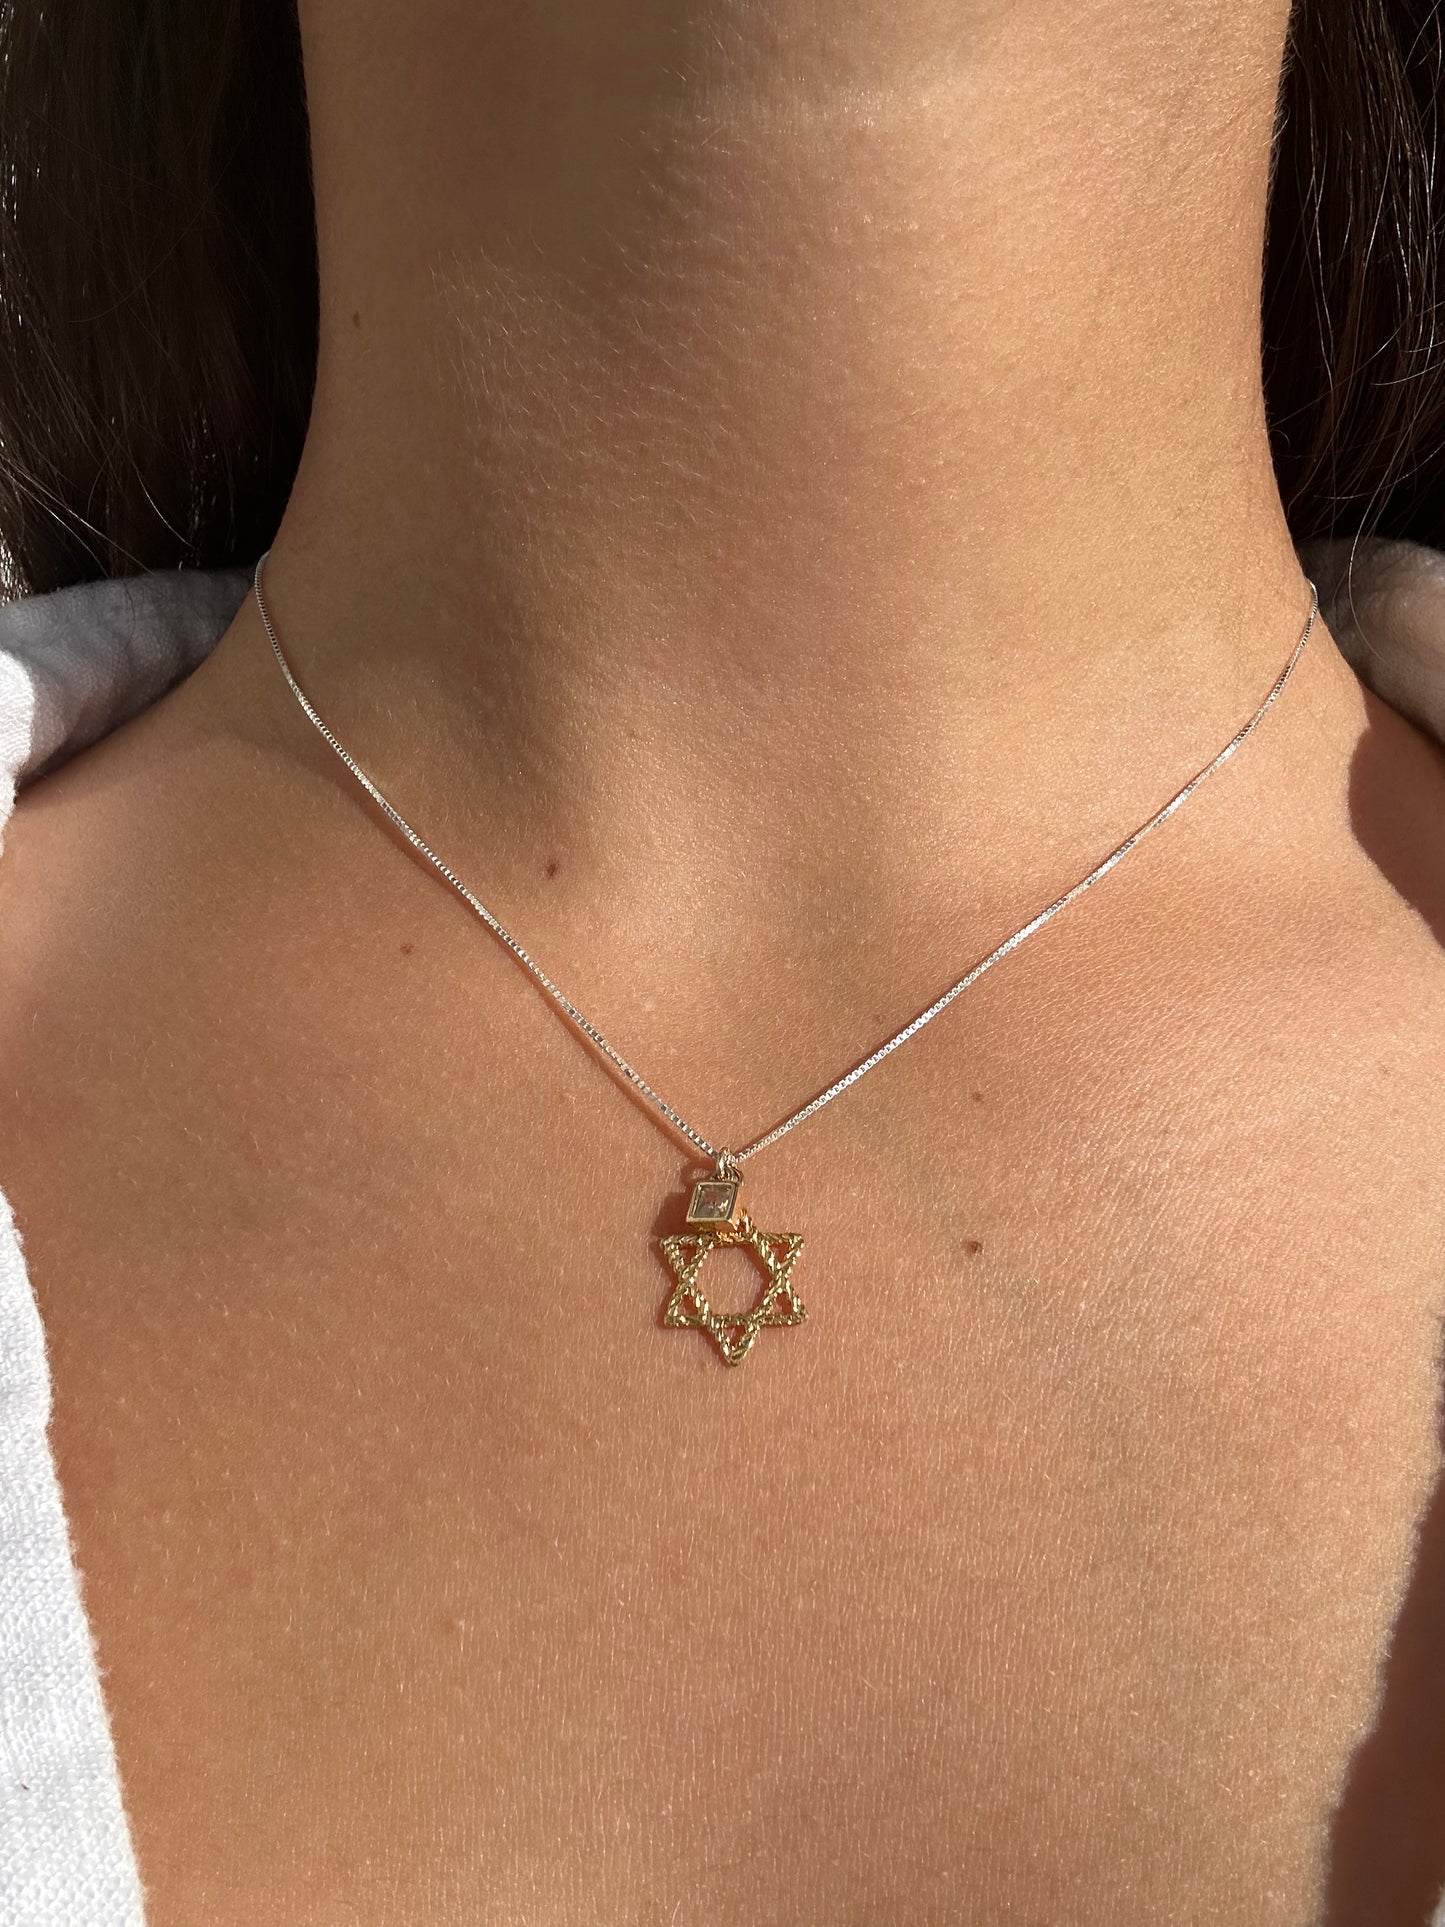 Gold/Silver Jewish Star Necklace